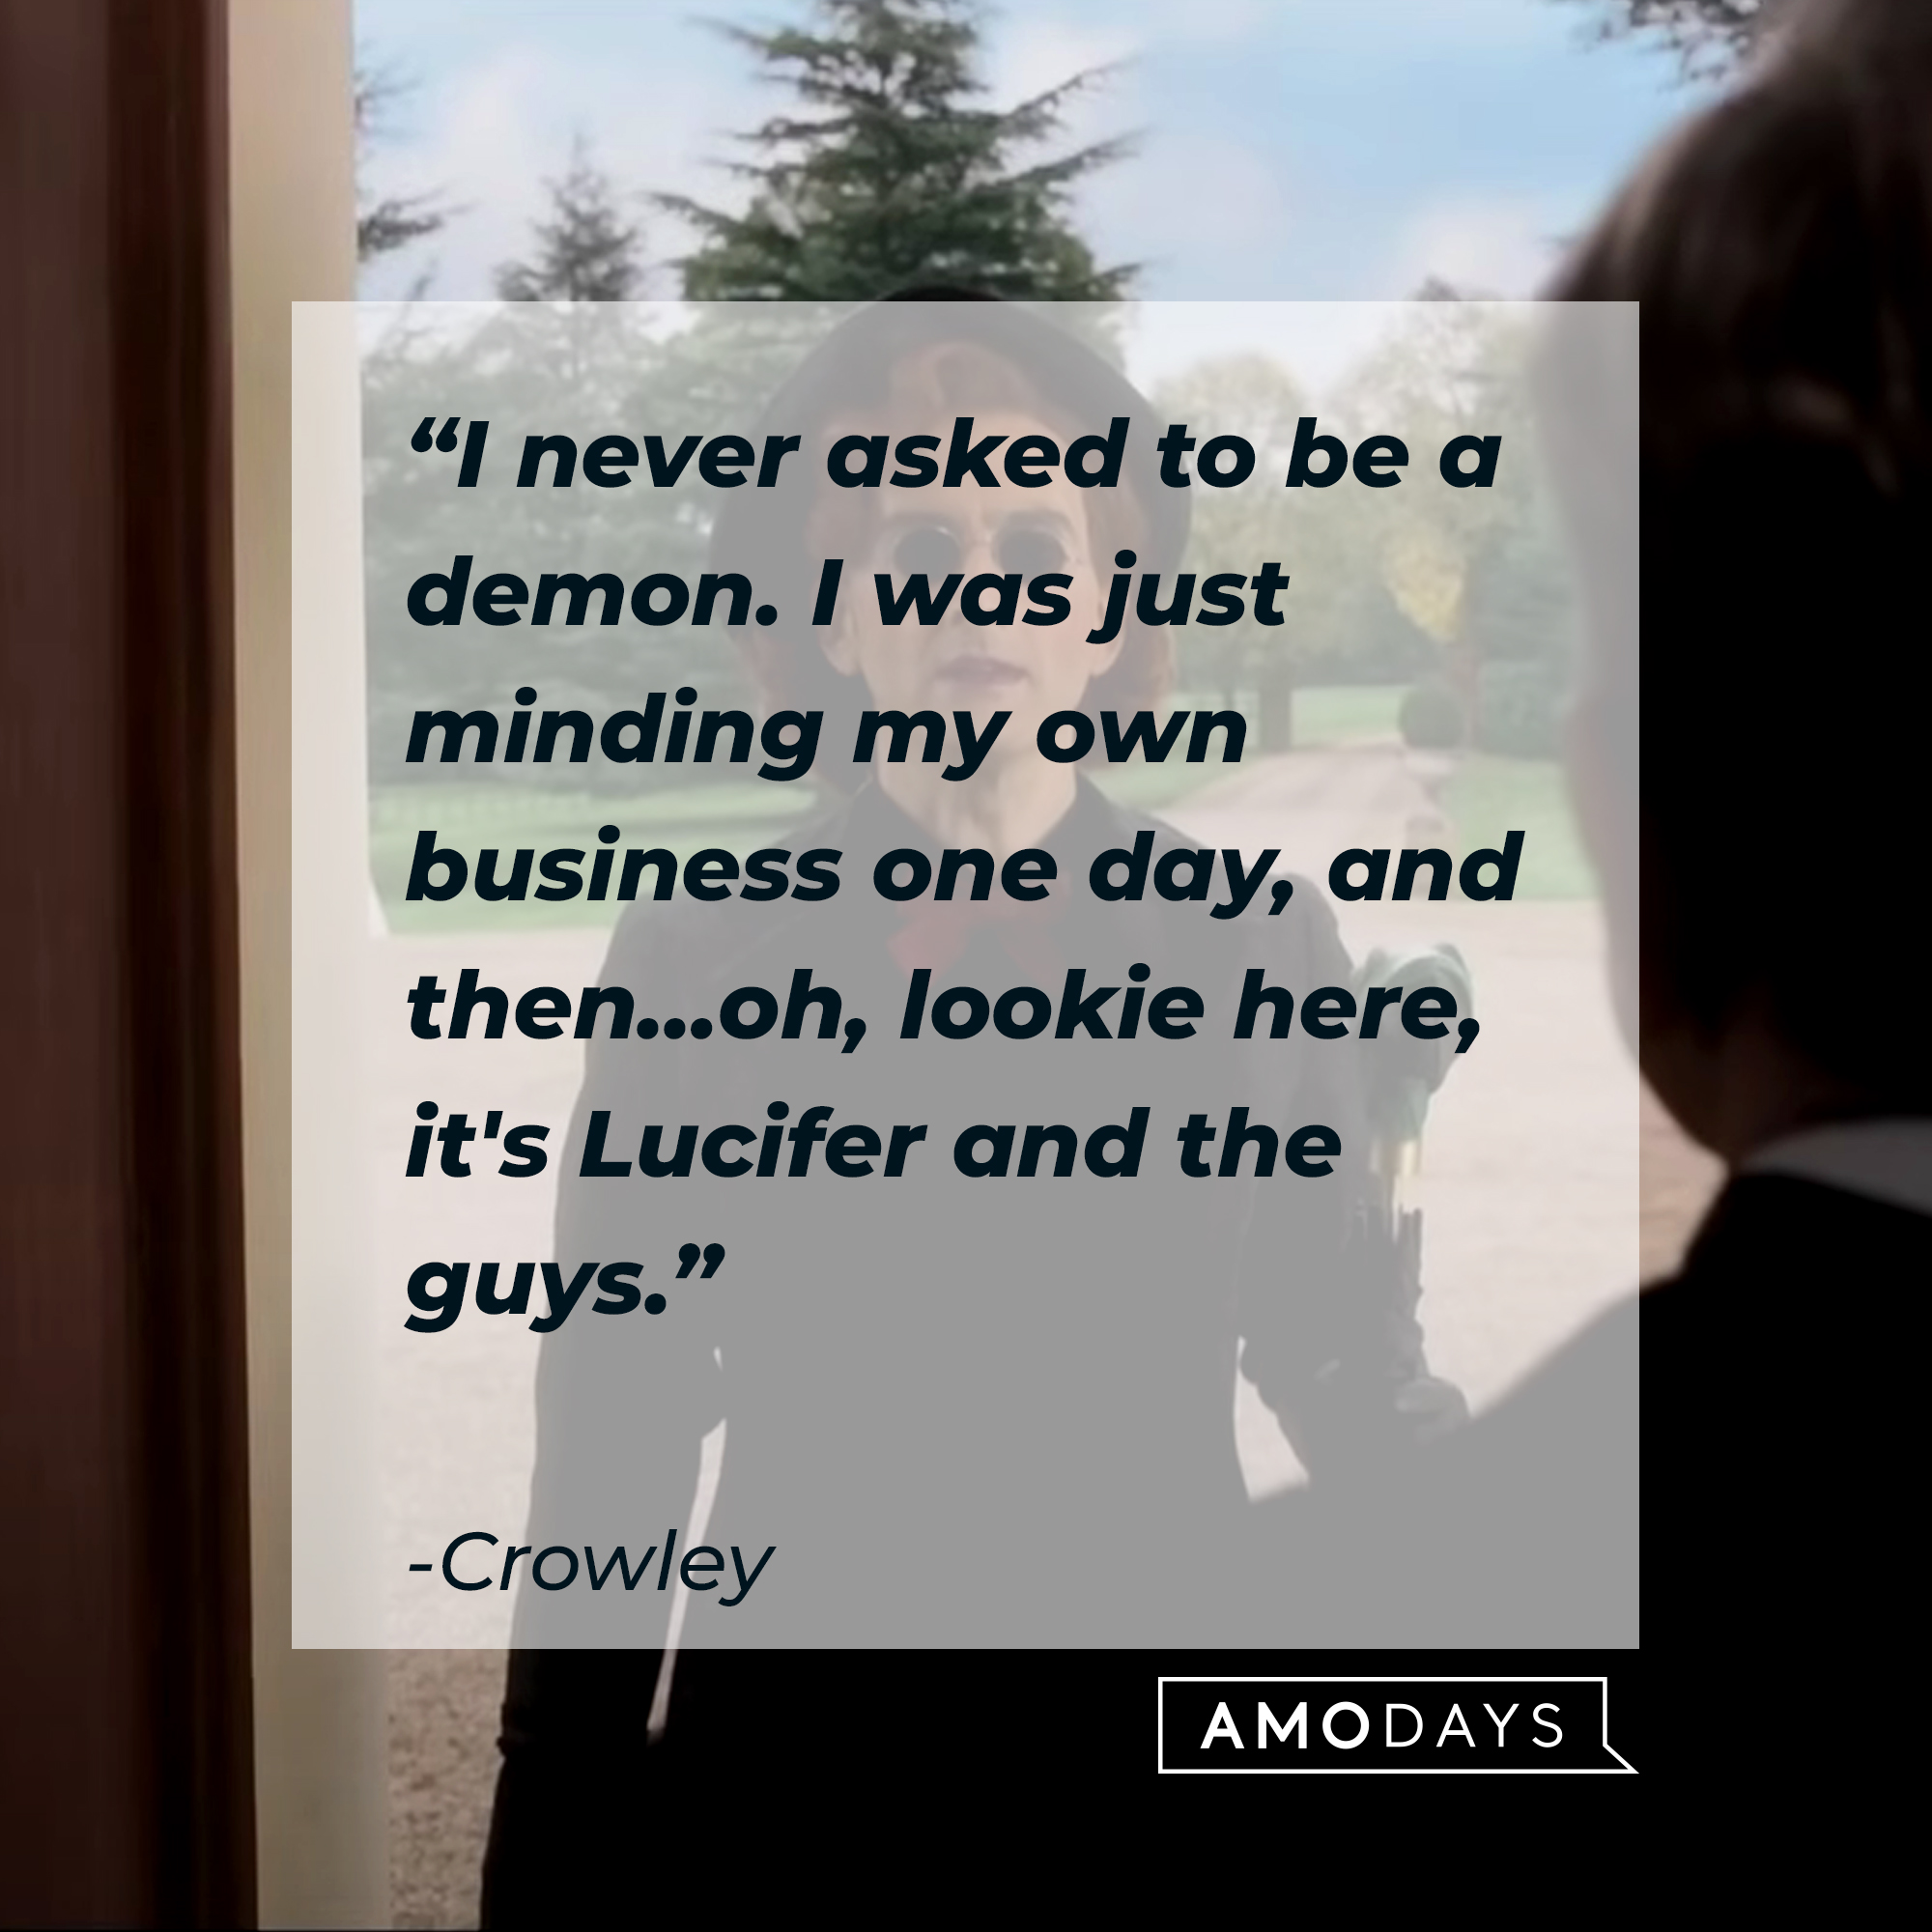 Crowley's quote: "I never asked to be a demon. I was just minding my own business one day, and then...oh, lookie here, it's Lucifer and the guys." | Source: Facebook.com/goodomensprime